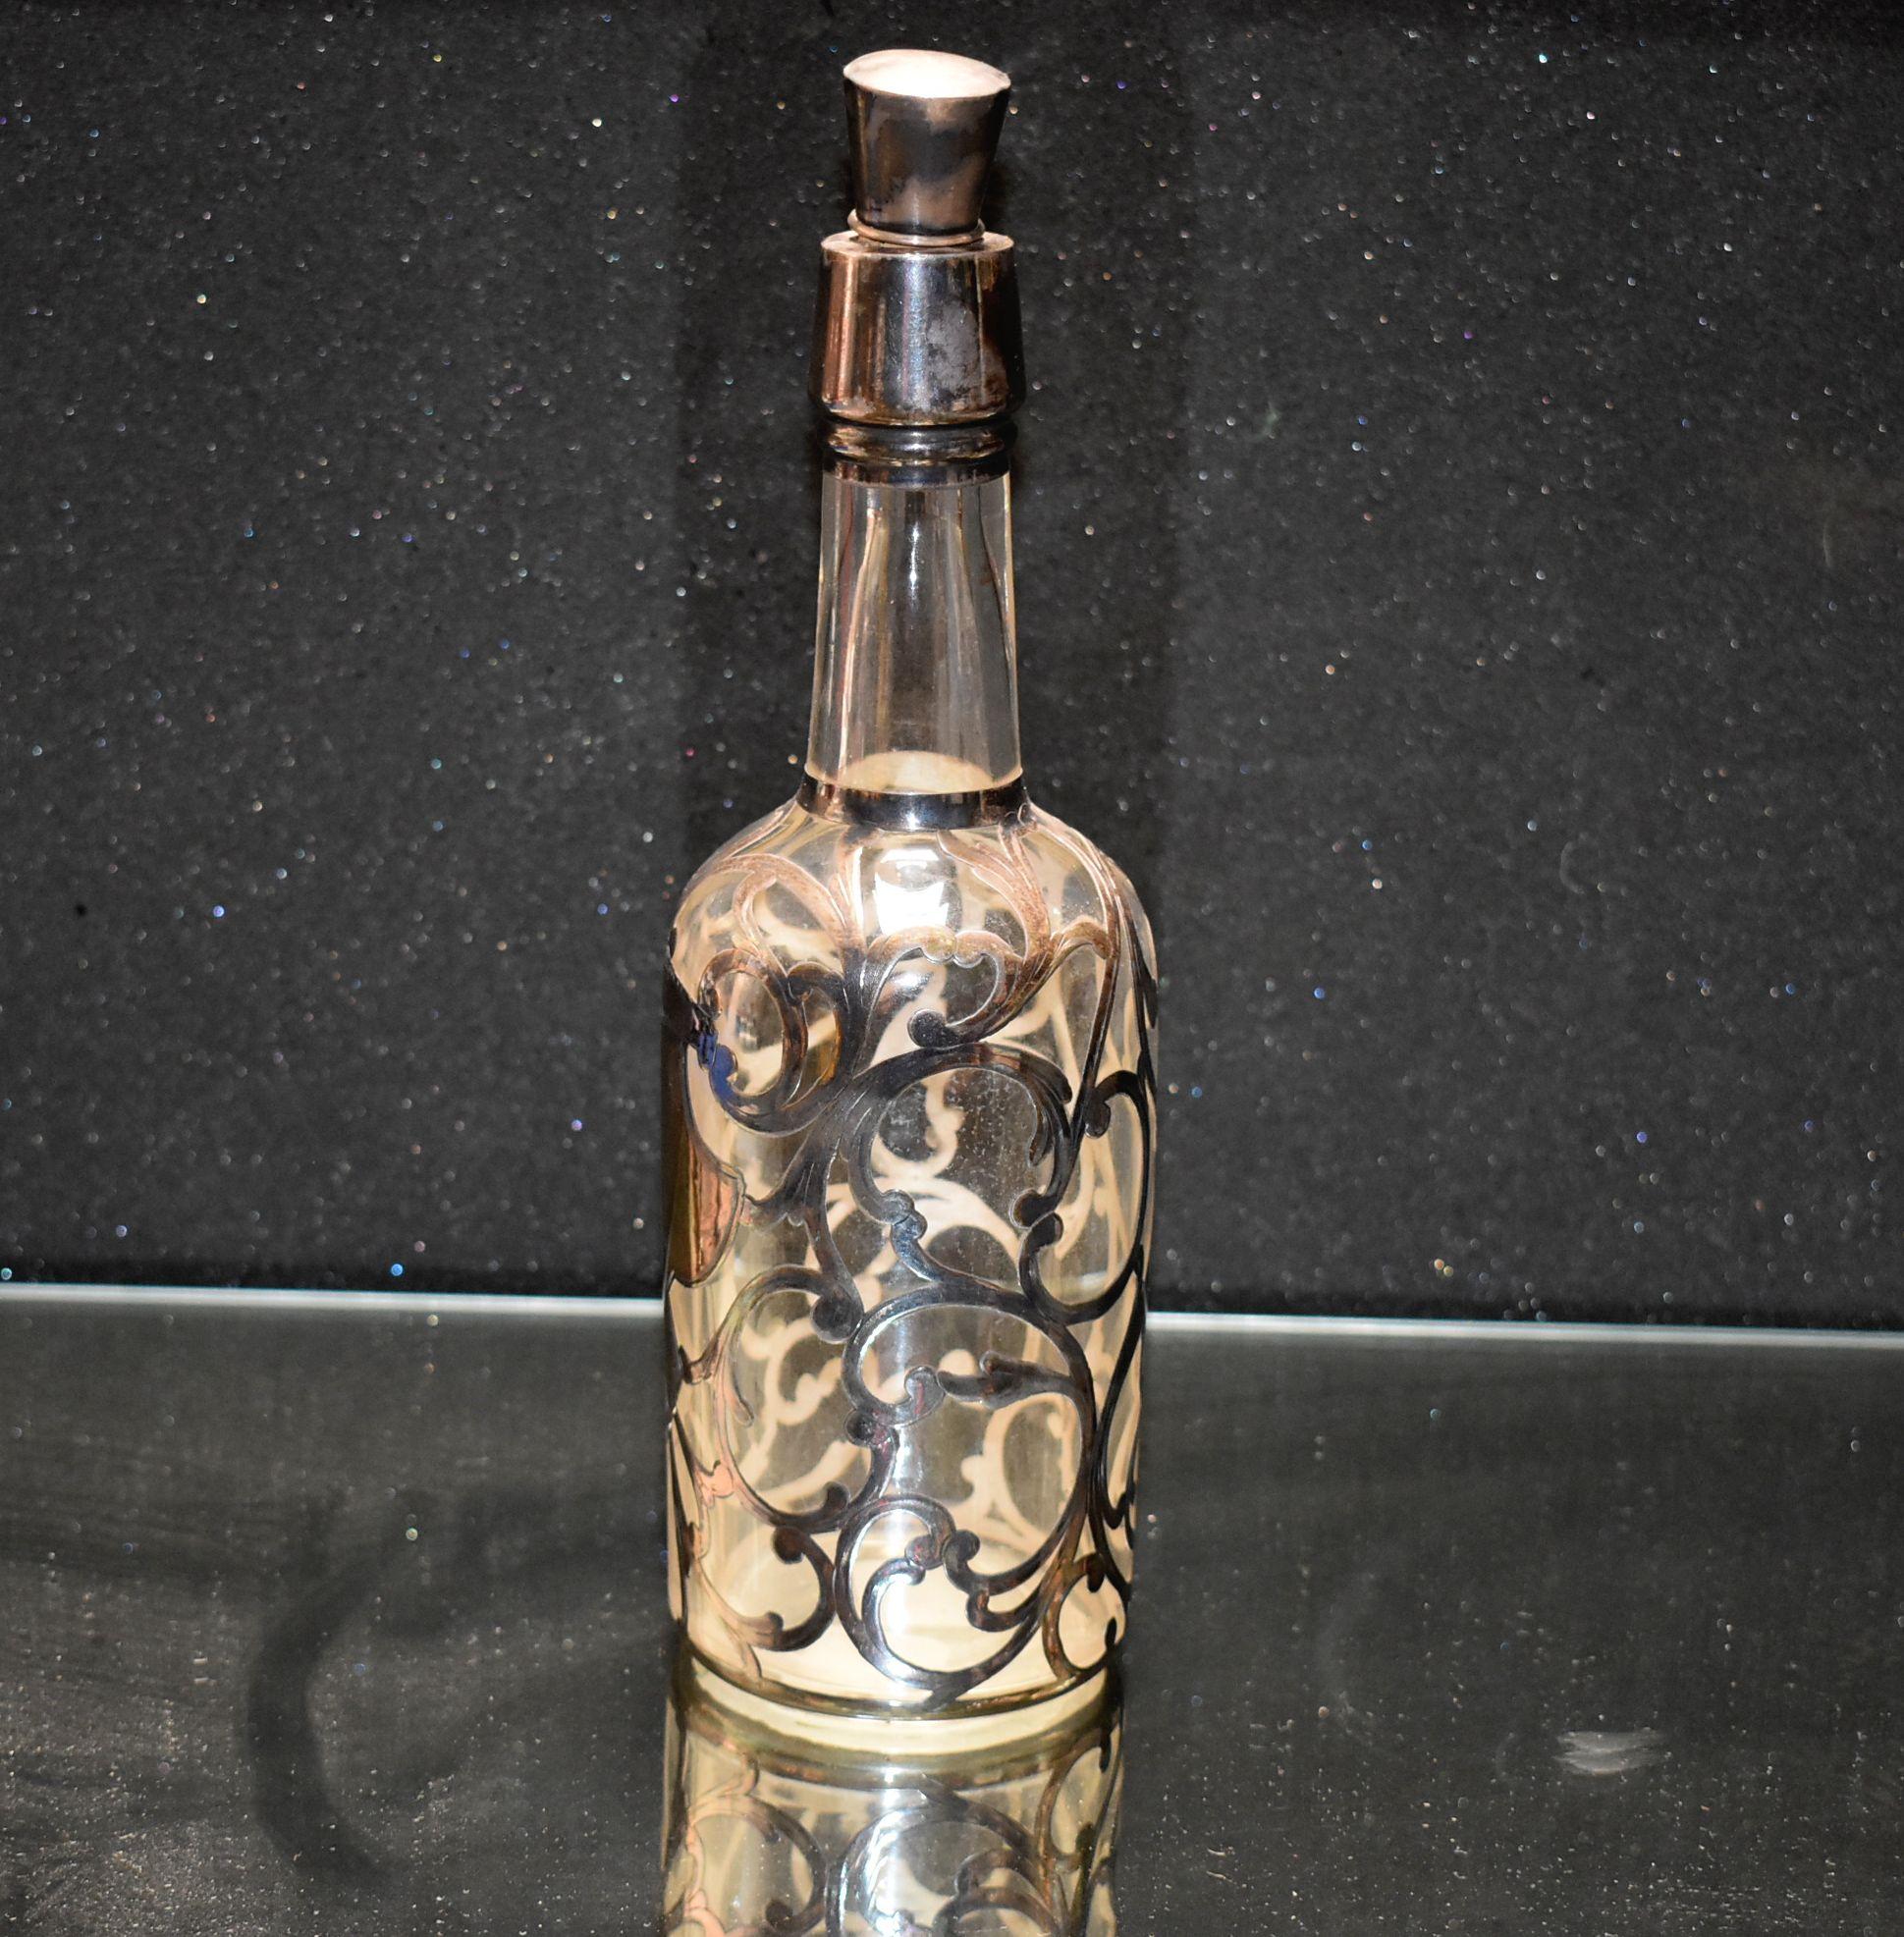 North American Antique American Silver Overlay Decanter